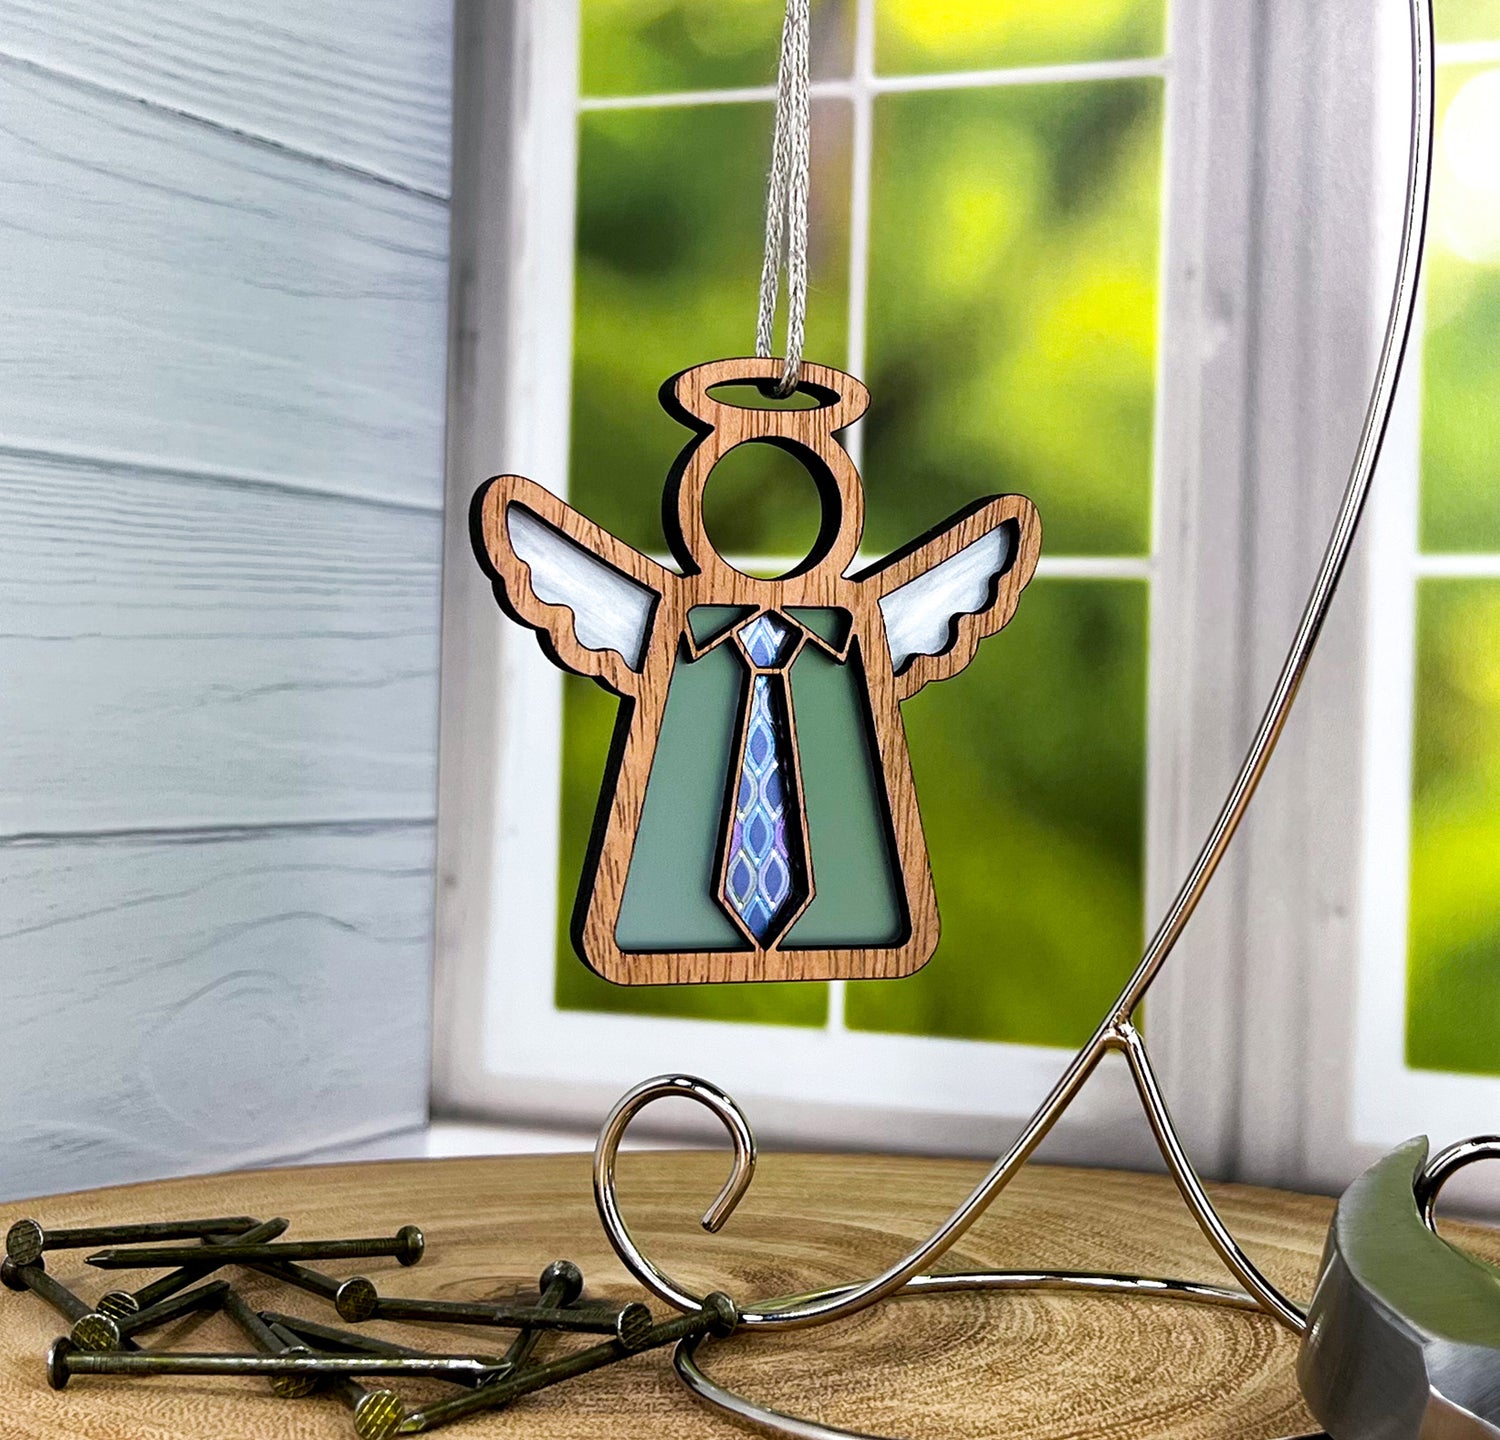 An angel ornament with a tie design, ideal as a Father's Day gift from a daughter, also suitable for use as a decoration or a memorial gift.